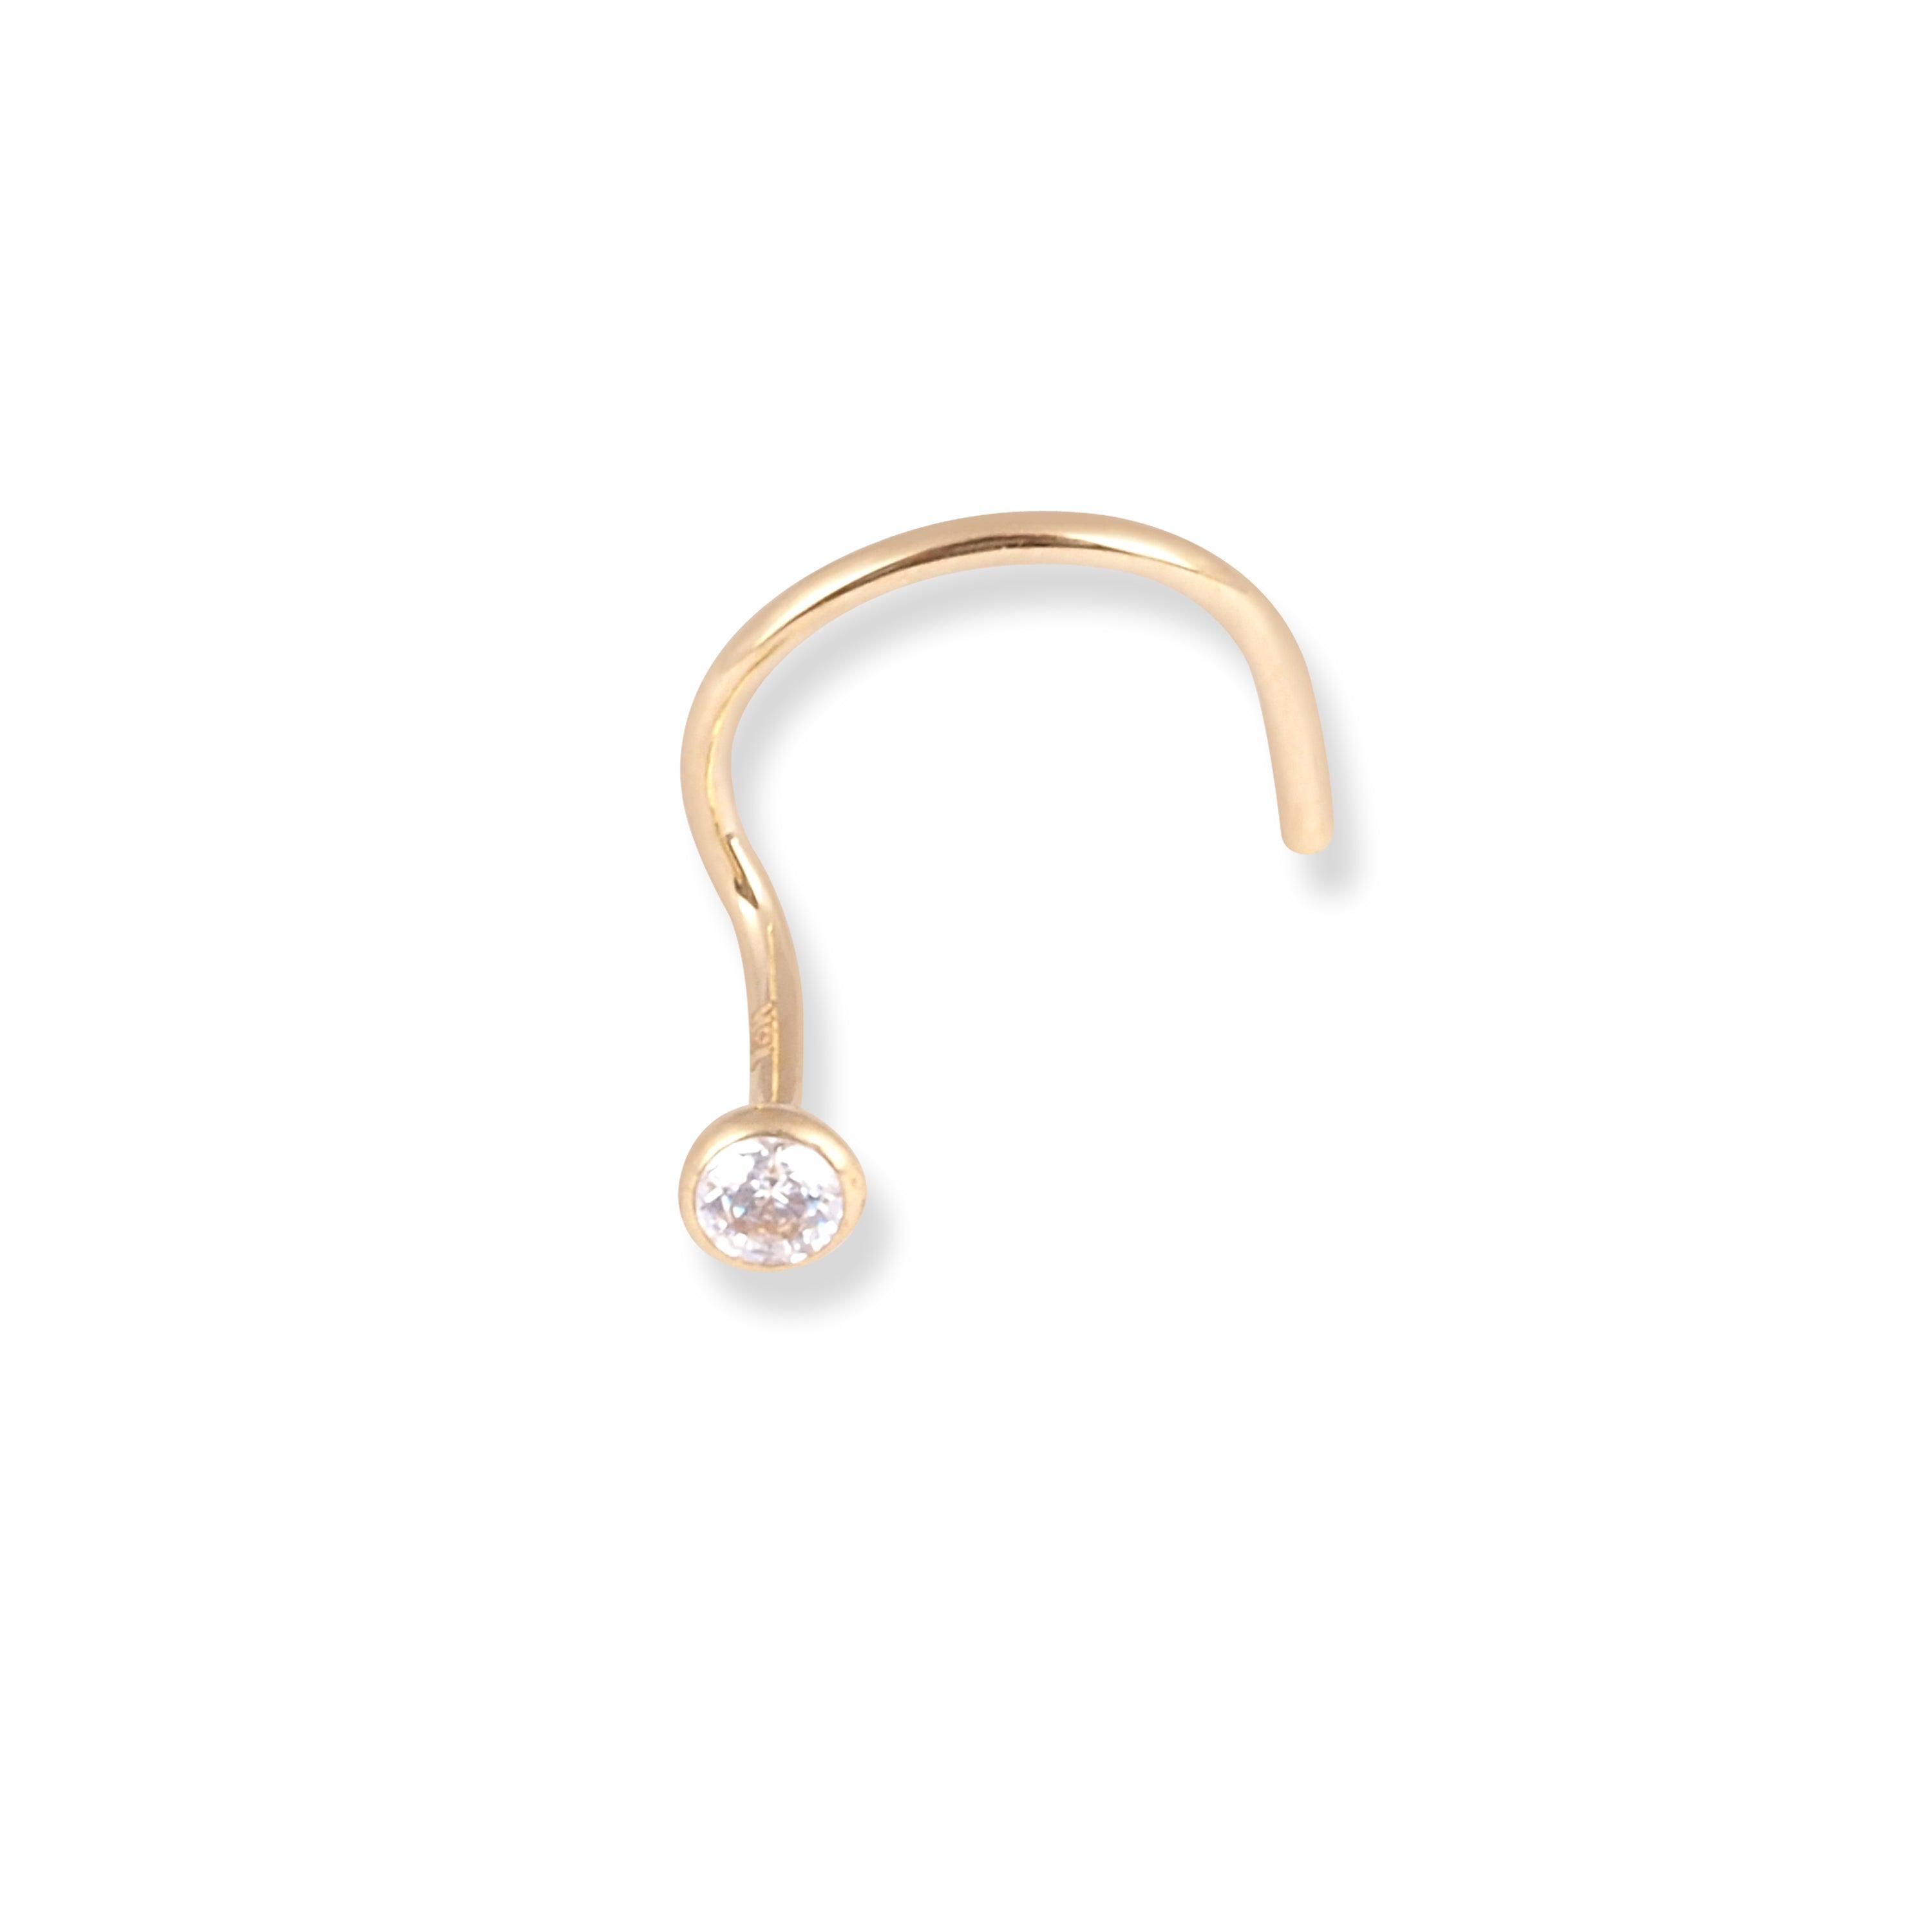 18ct Yellow Gold Wire Back Nose Stud with Cubic Zirconia Stone in Bezel Setting NS-7567 - Minar Jewellers